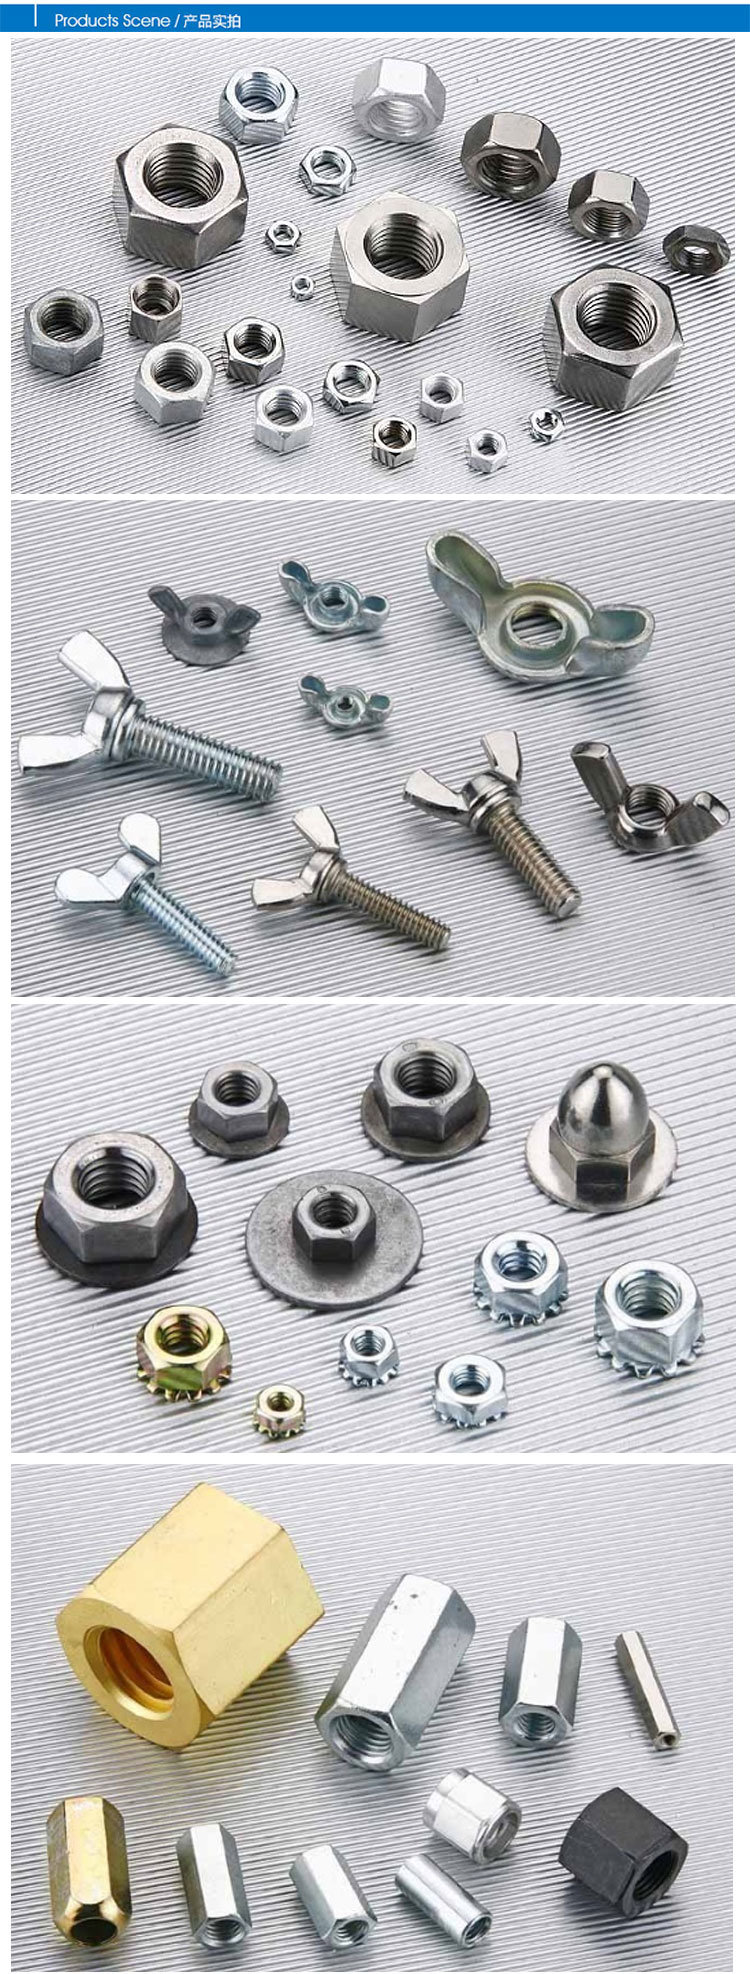 ISO7035, ISO7036, DIN935, Hexagon Slotted Nuts, Castle Nuts